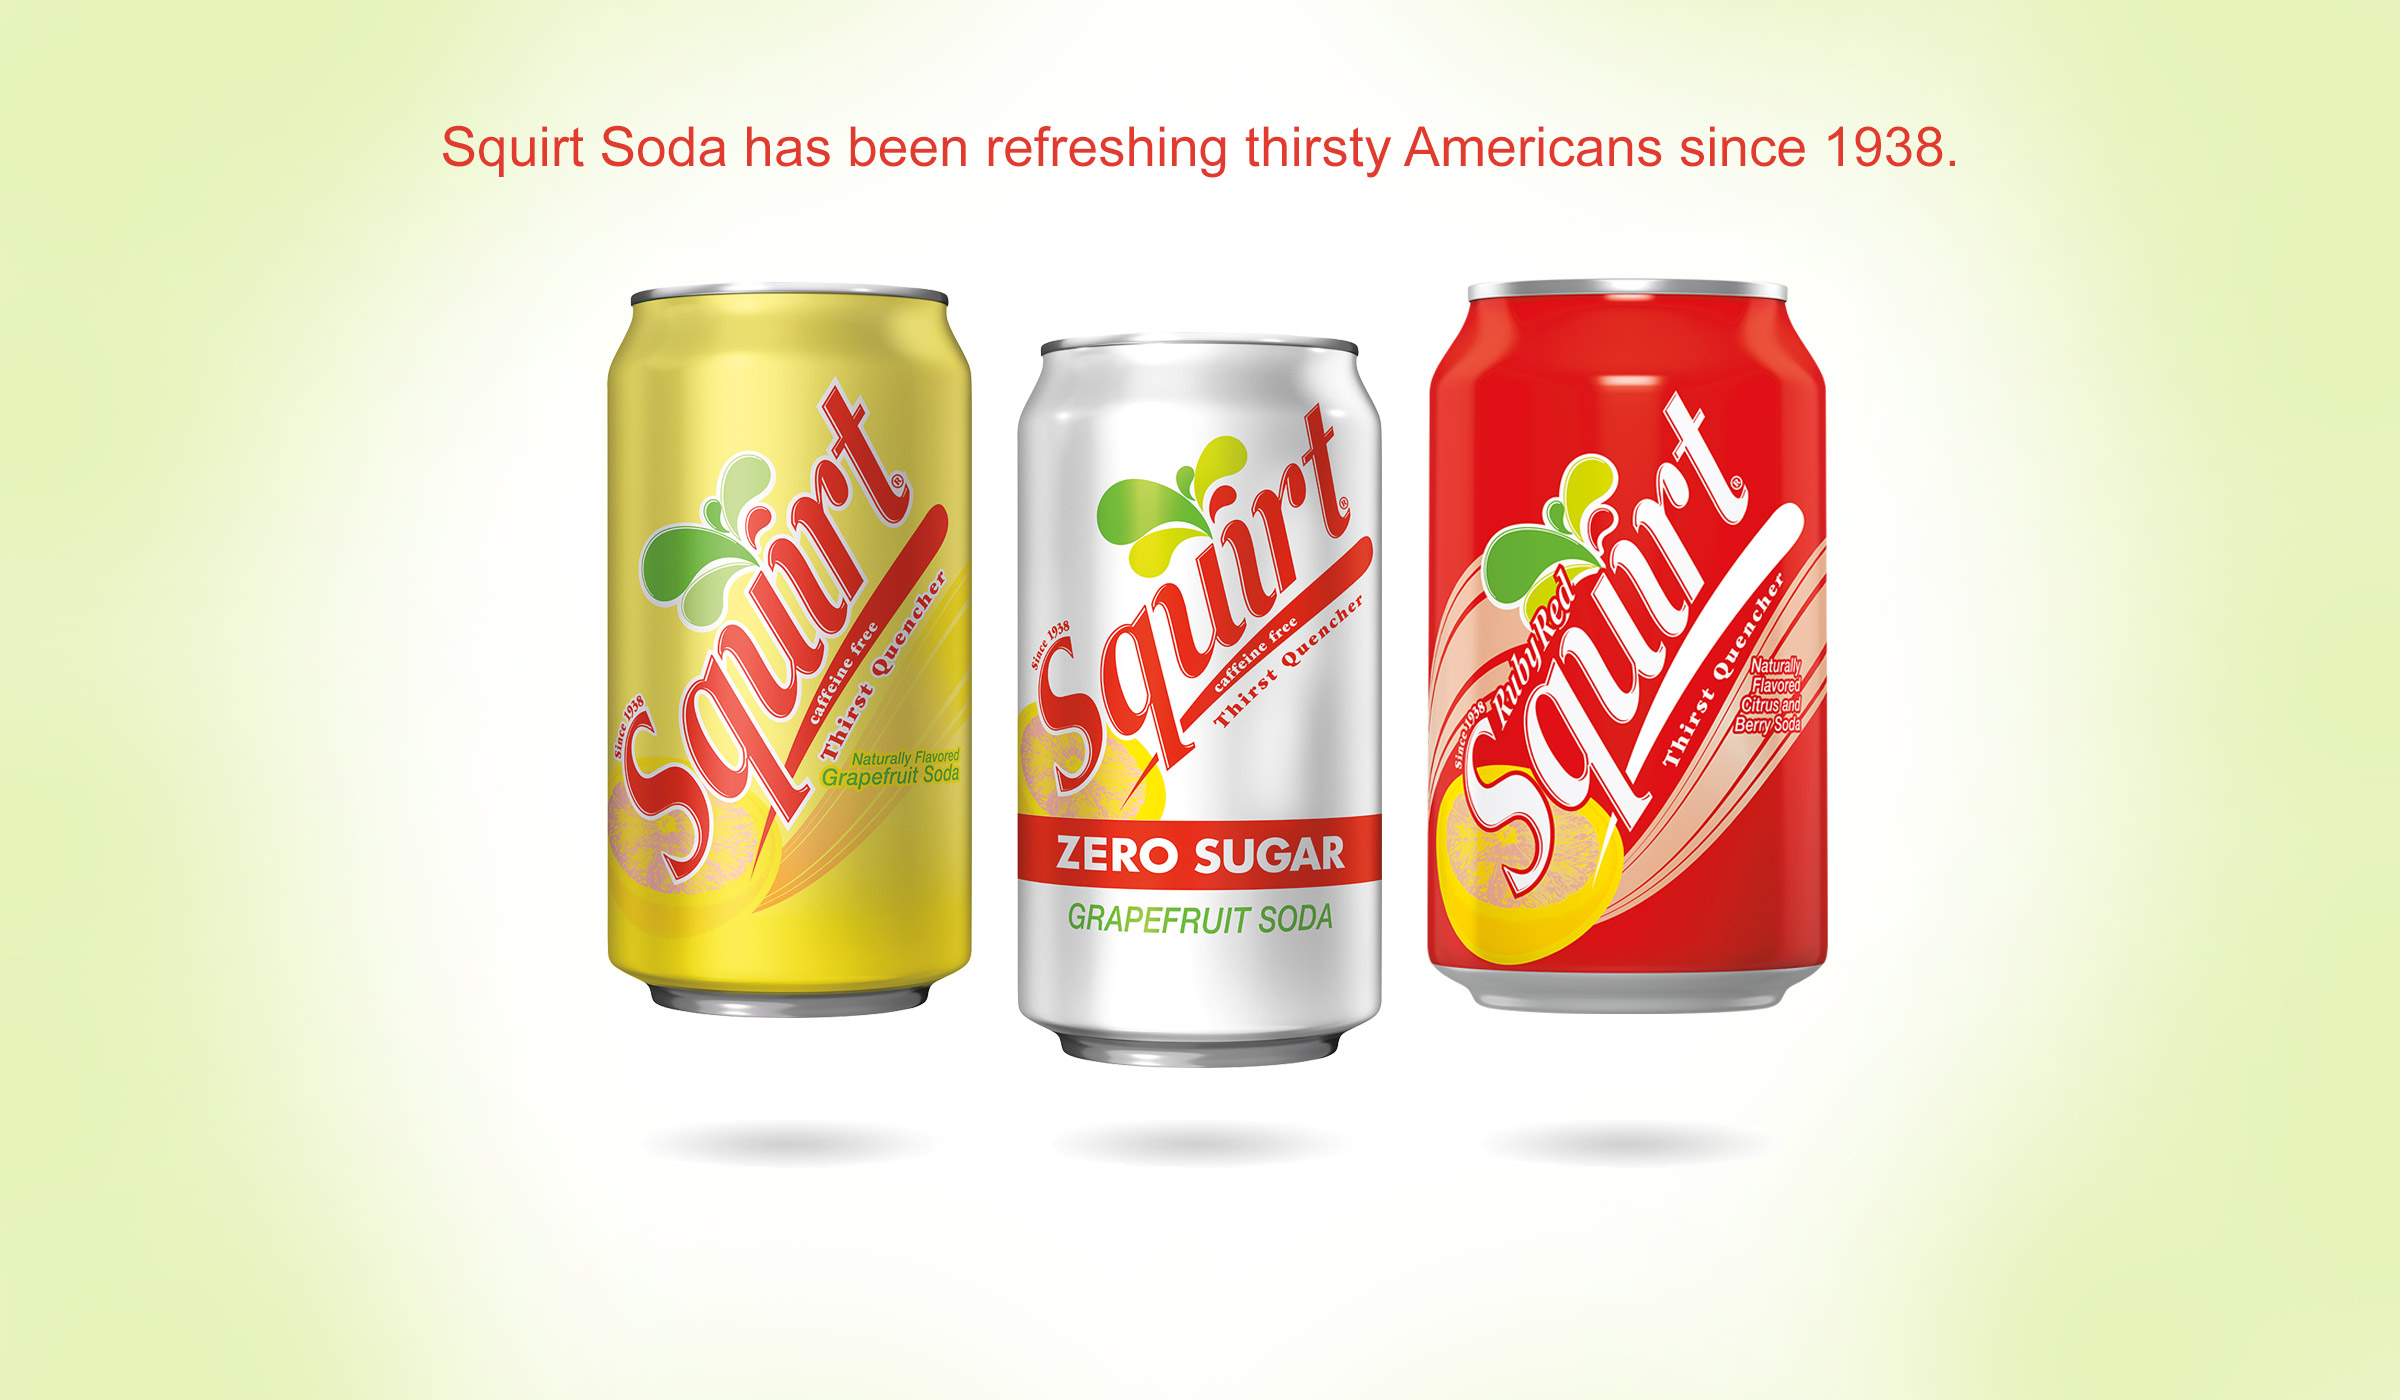 Squirt Soda has been refreshing thirsty Americans since 1938